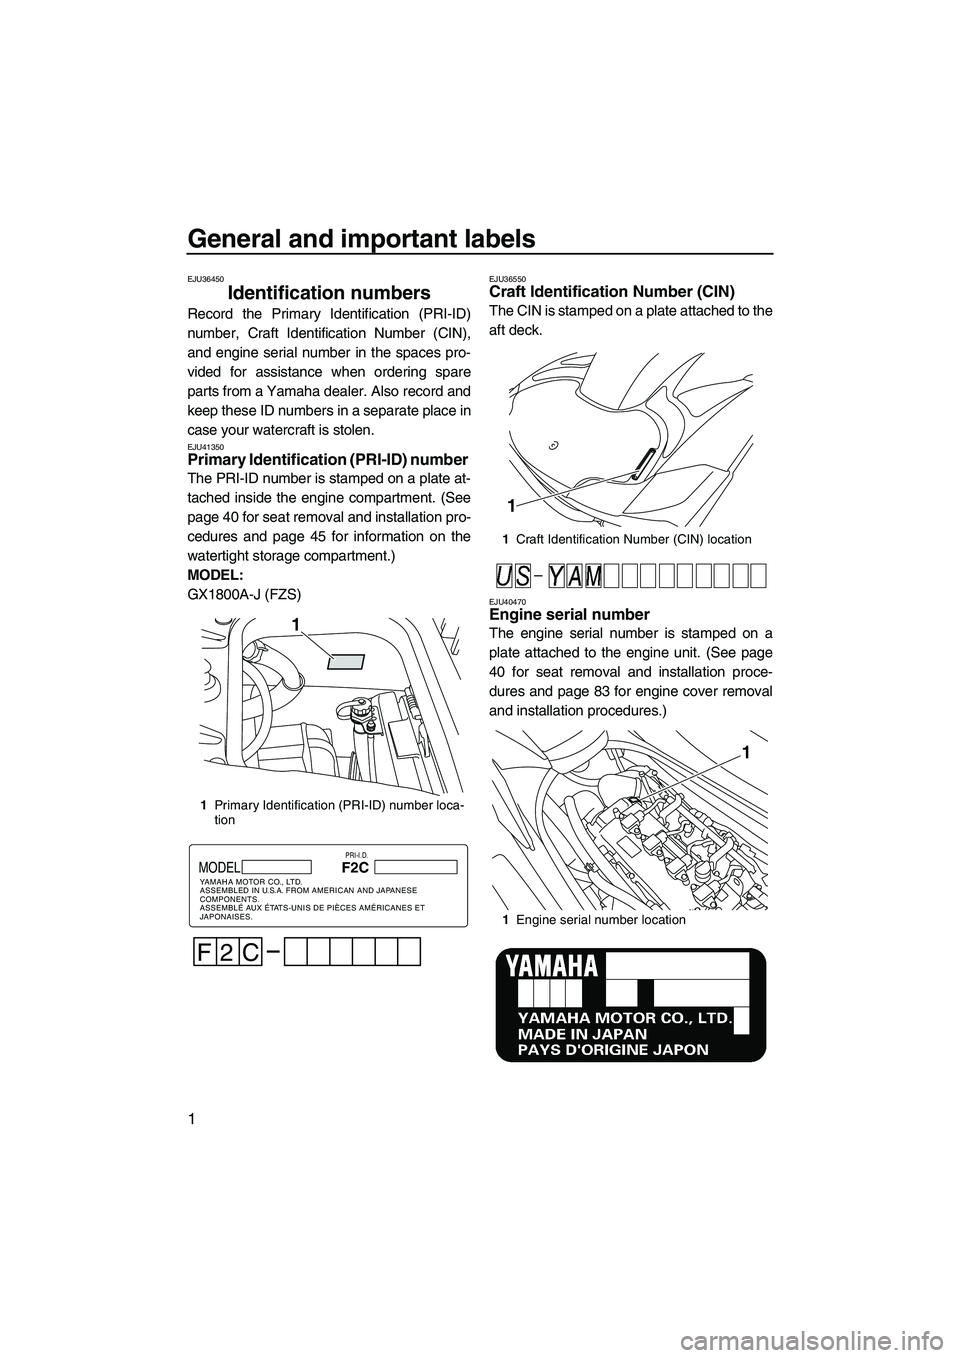 YAMAHA FZS 2010  Owners Manual General and important labels
1
EJU36450
Identification numbers 
Record the Primary Identification (PRI-ID)
number, Craft Identification Number (CIN),
and engine serial number in the spaces pro-
vided 